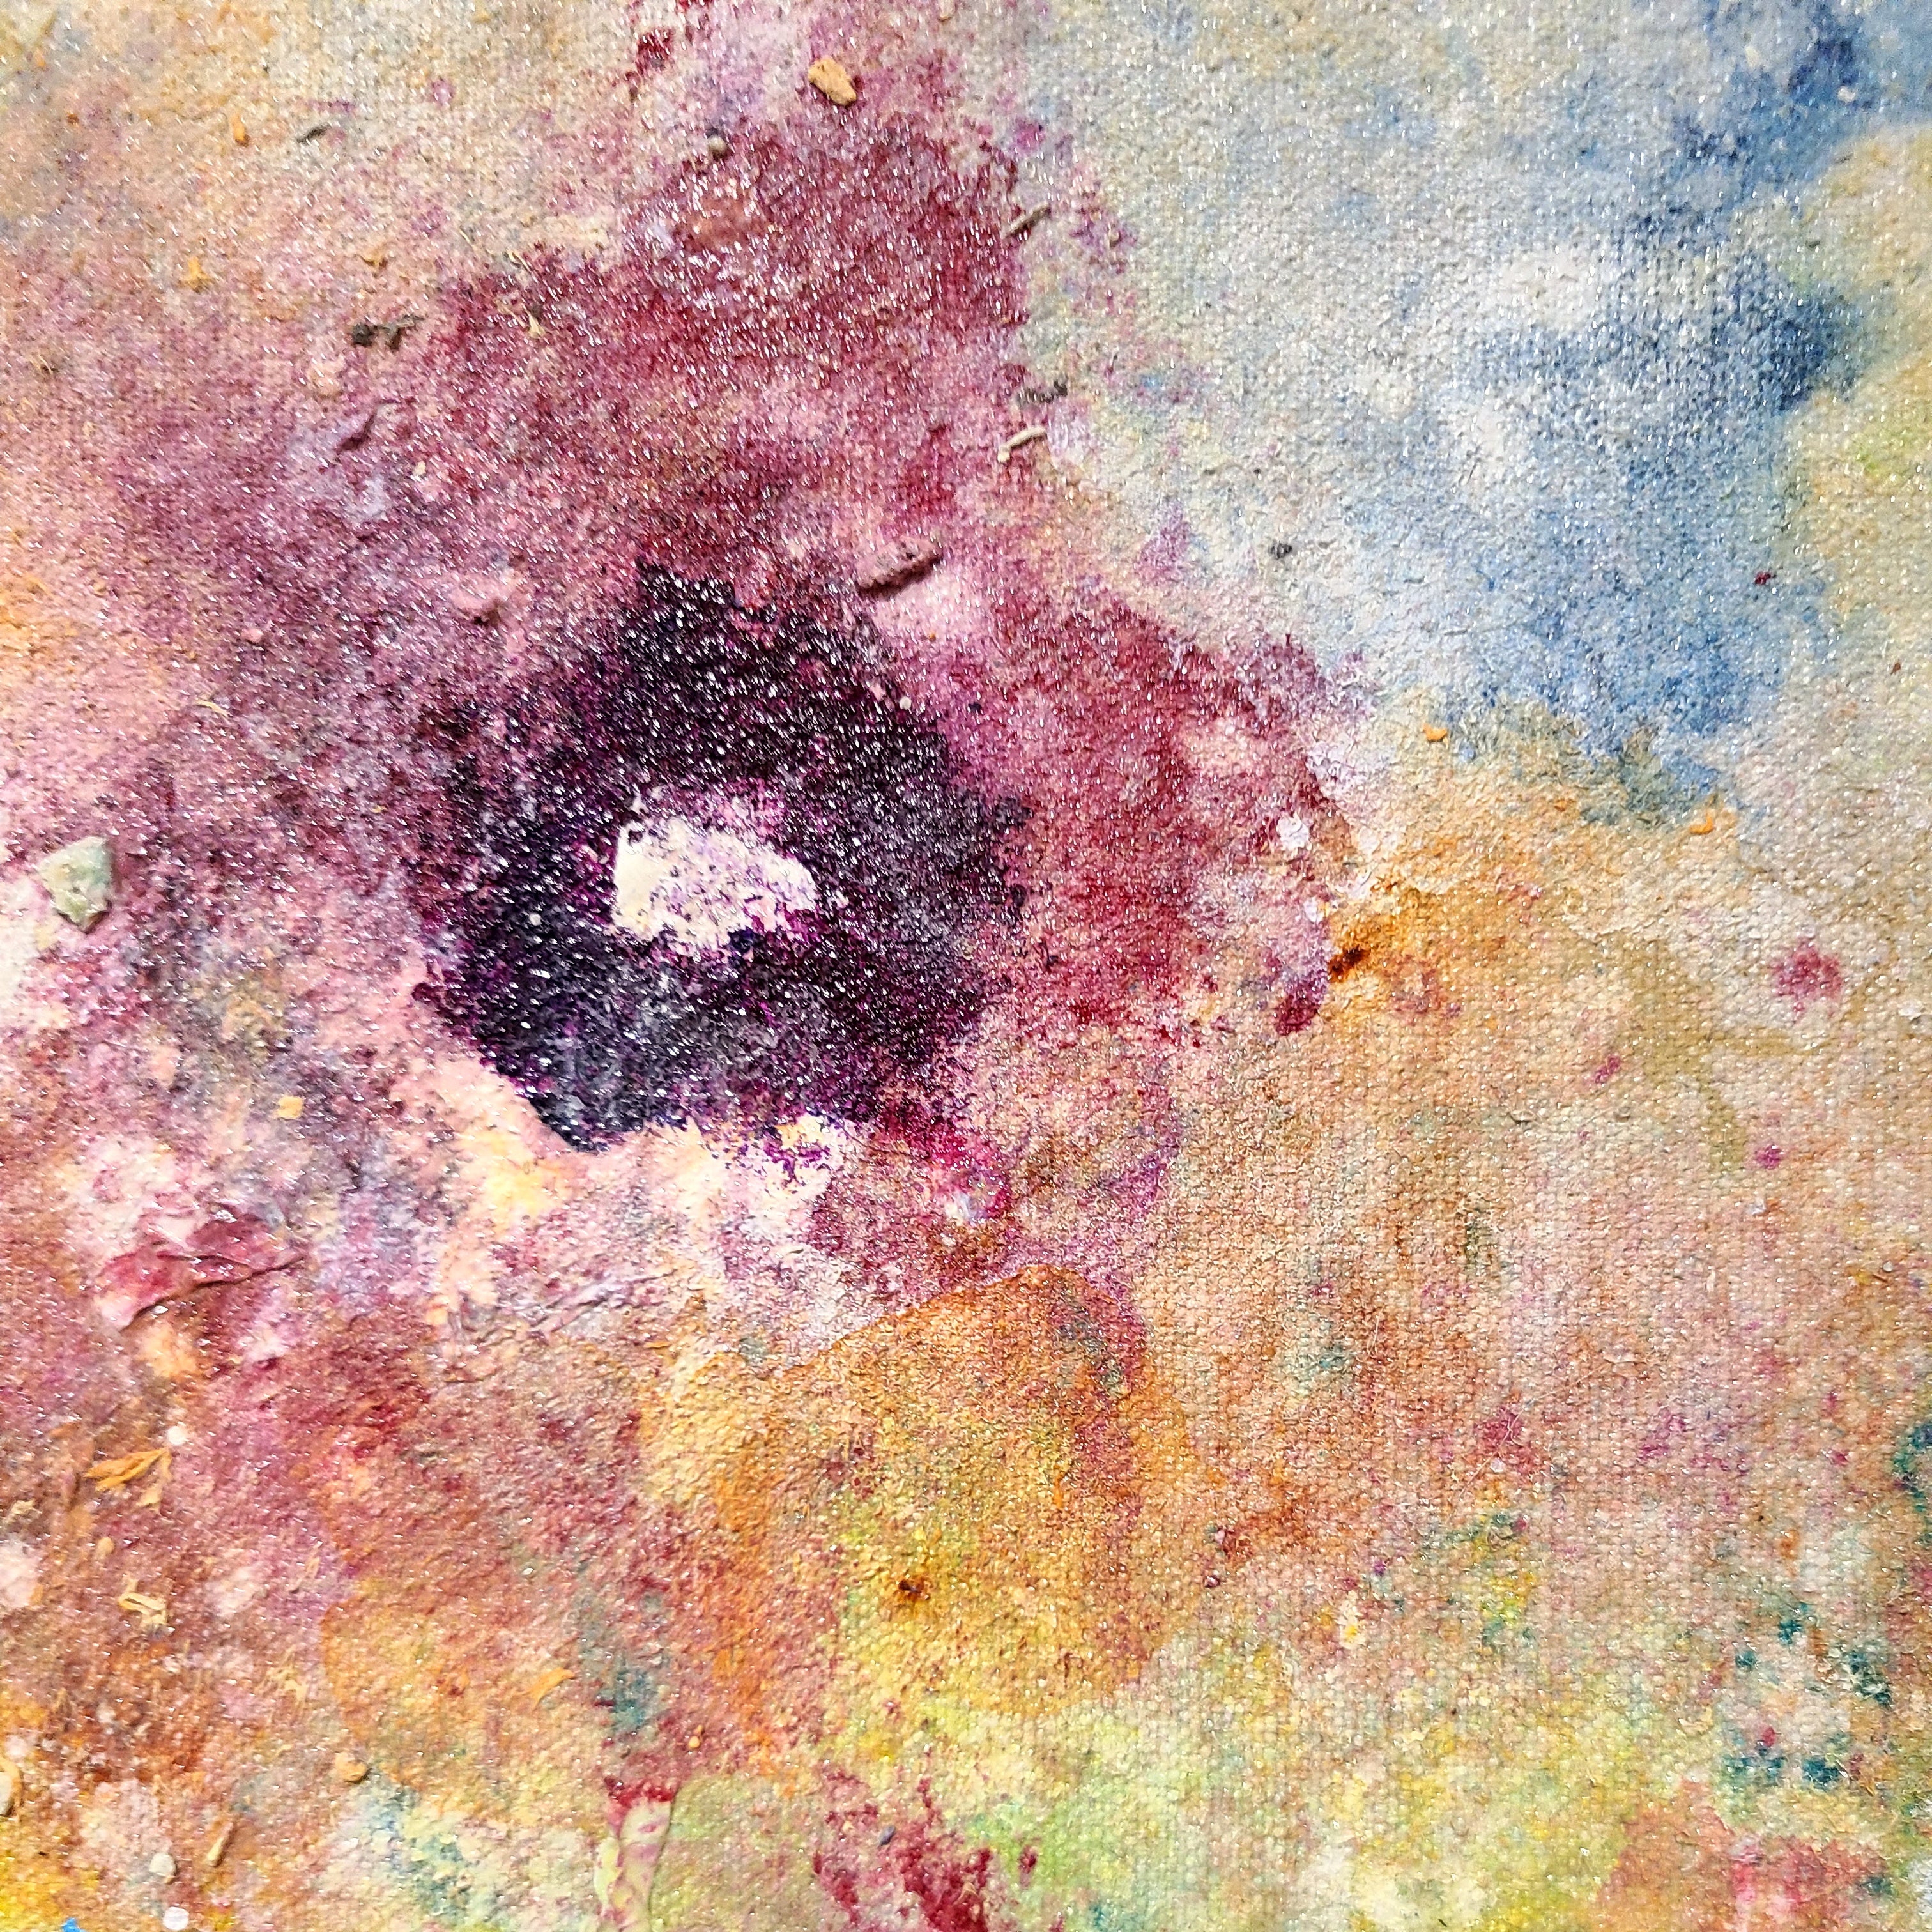 FLORAL ABSTRACT PAINTING BY BRIAN MESSINA (2017)